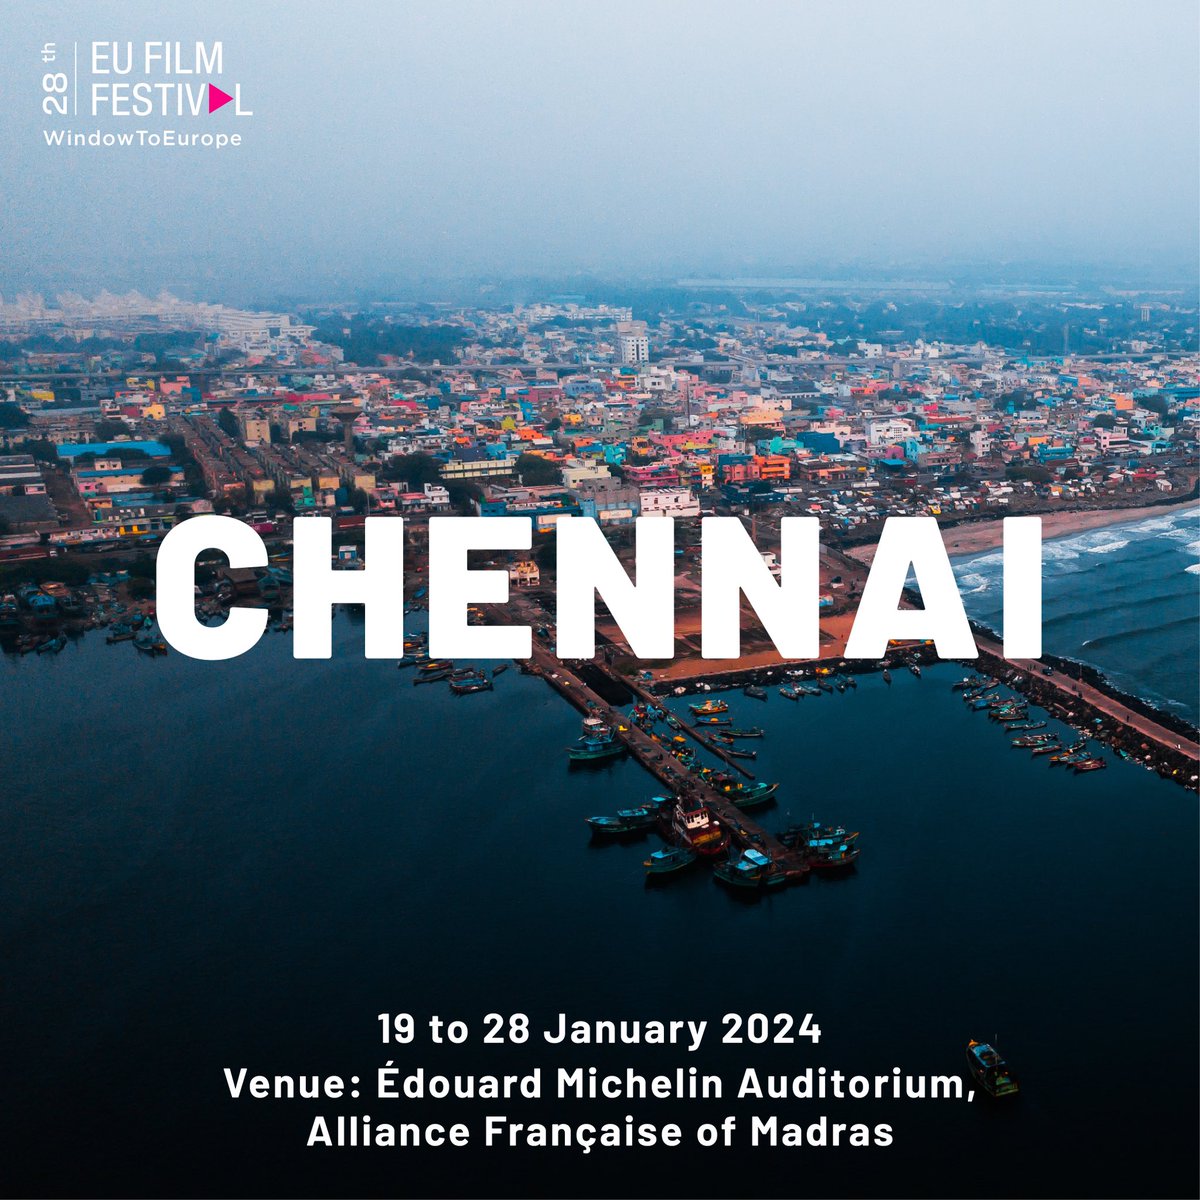 Chennai, it's showtime!🎬The European Union Film Festival #EUFF2024 is coming to #Chennai. We bring to you a spectacular showcase of European cinema including 28 films in 25 languages, spanning multiple languages & cultures. And guess what? It's FREE for everyone! @EU_in_India